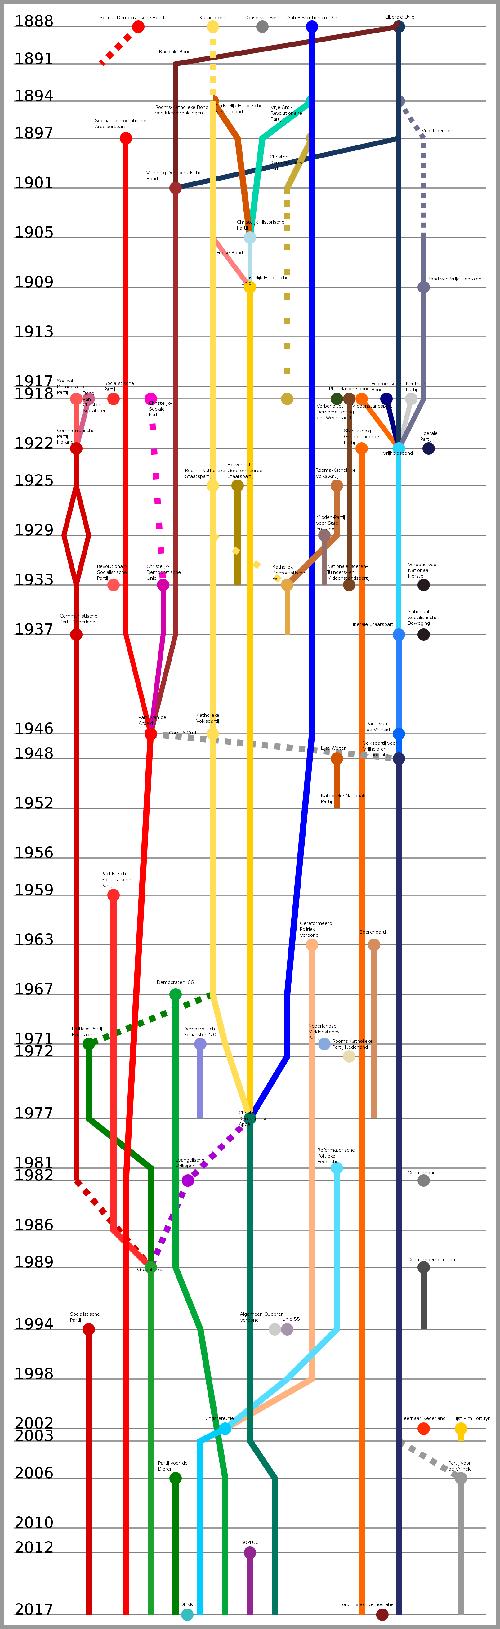 Second chamber seat number of political parties from 1888-2017, Netherlands